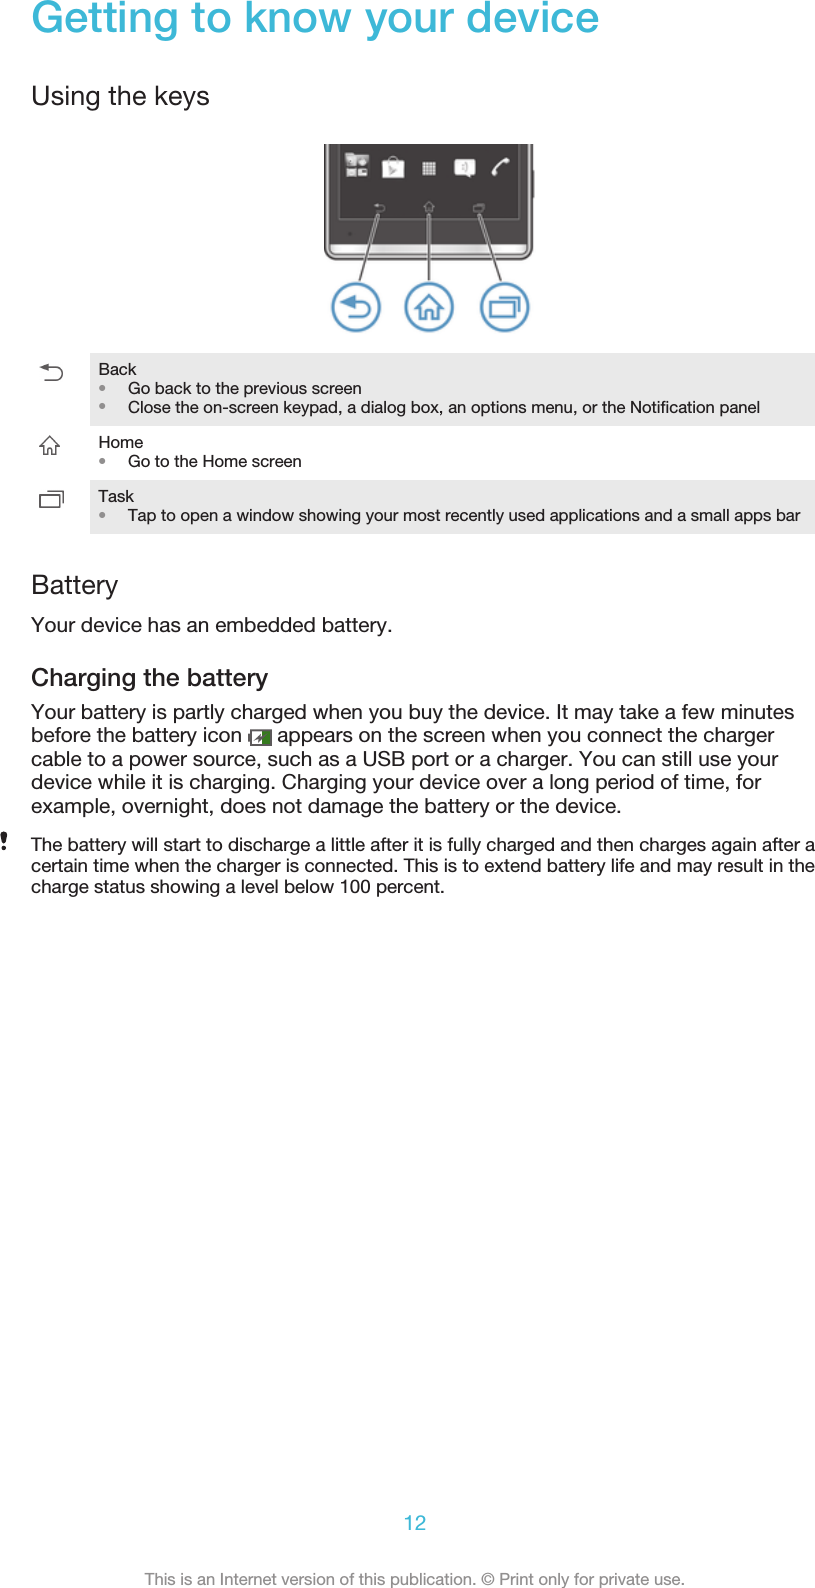 Getting to know your deviceUsing the keysBack•Go back to the previous screen•Close the on-screen keypad, a dialog box, an options menu, or the Notification panelHome•Go to the Home screenTask•Tap to open a window showing your most recently used applications and a small apps barBatteryYour device has an embedded battery.Charging the batteryYour battery is partly charged when you buy the device. It may take a few minutesbefore the battery icon   appears on the screen when you connect the chargercable to a power source, such as a USB port or a charger. You can still use yourdevice while it is charging. Charging your device over a long period of time, forexample, overnight, does not damage the battery or the device.The battery will start to discharge a little after it is fully charged and then charges again after acertain time when the charger is connected. This is to extend battery life and may result in thecharge status showing a level below 100 percent.12This is an Internet version of this publication. © Print only for private use.